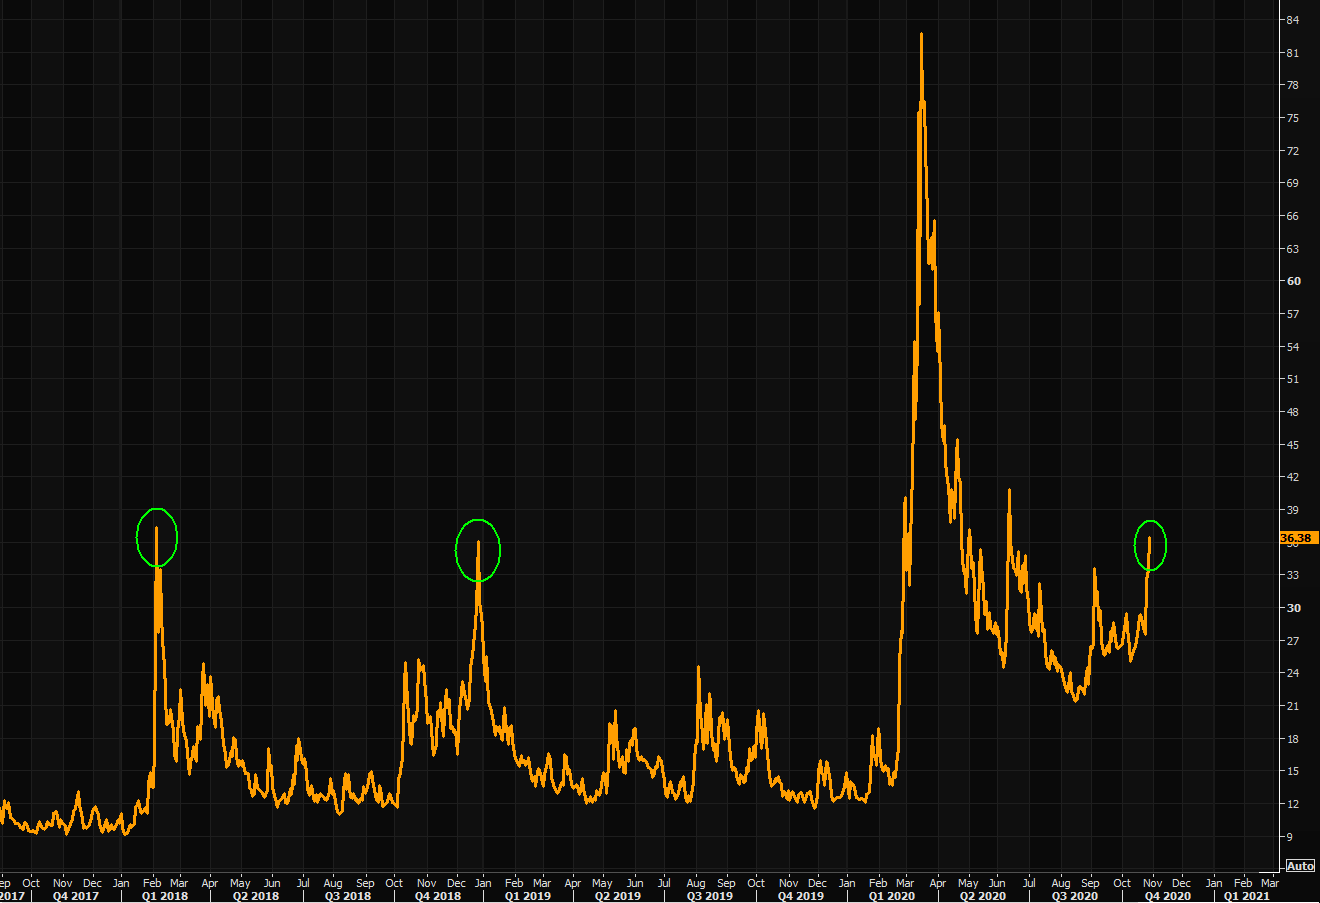 The VIX guy is back!